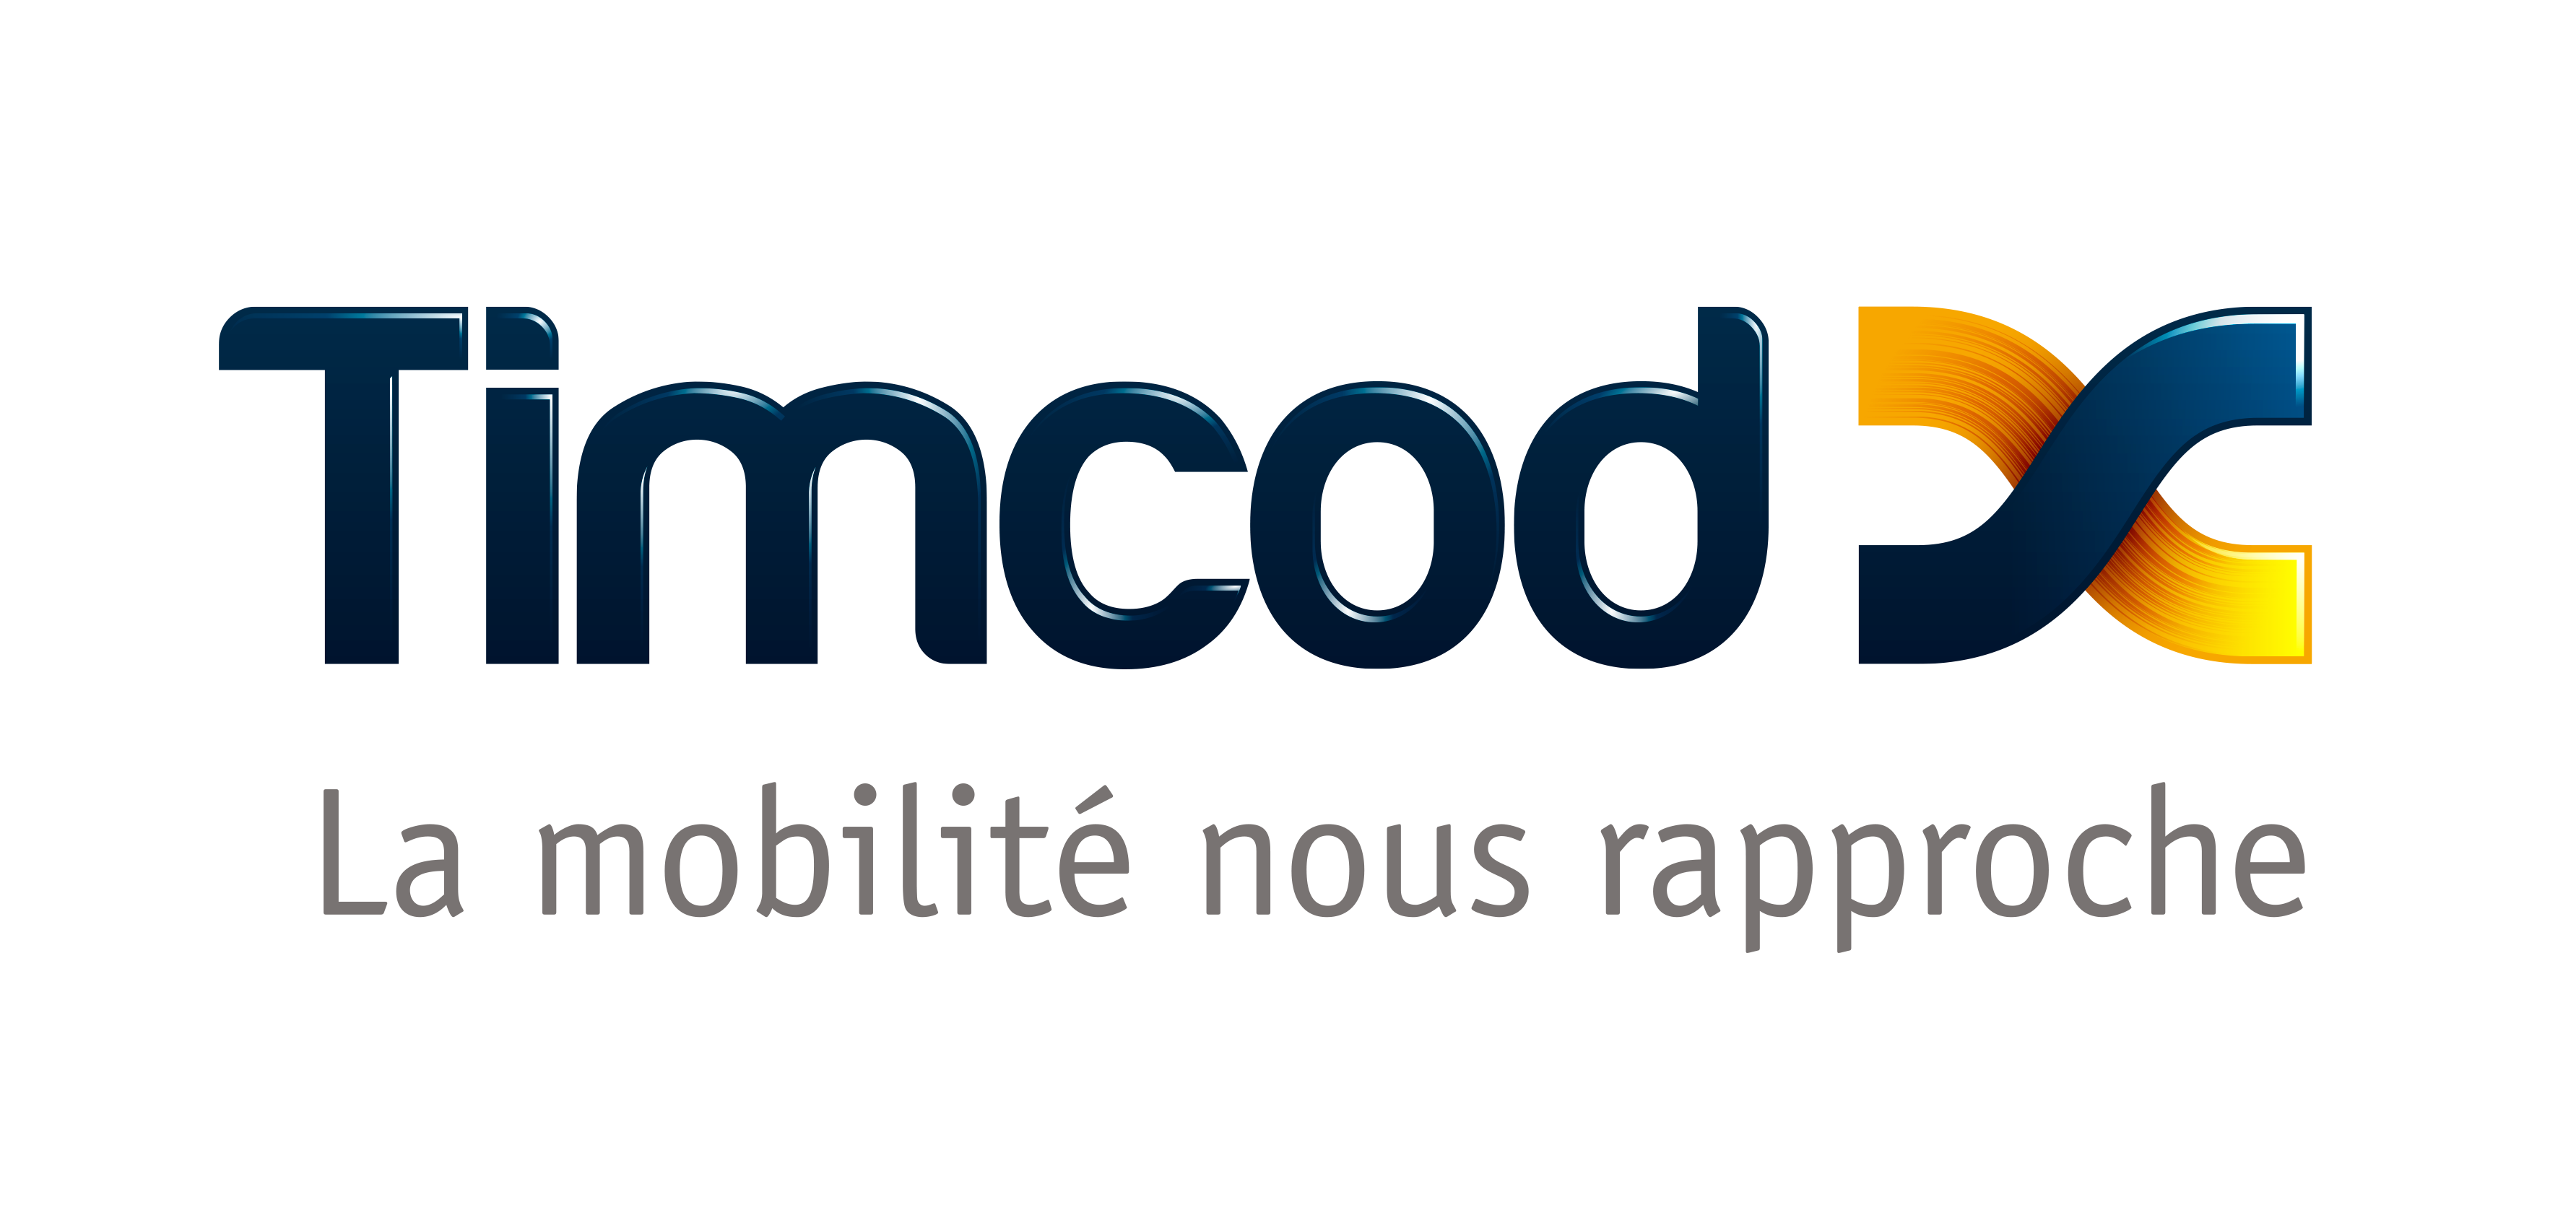 Quick Fact Gestion Commerciale 26 Timcod_logo